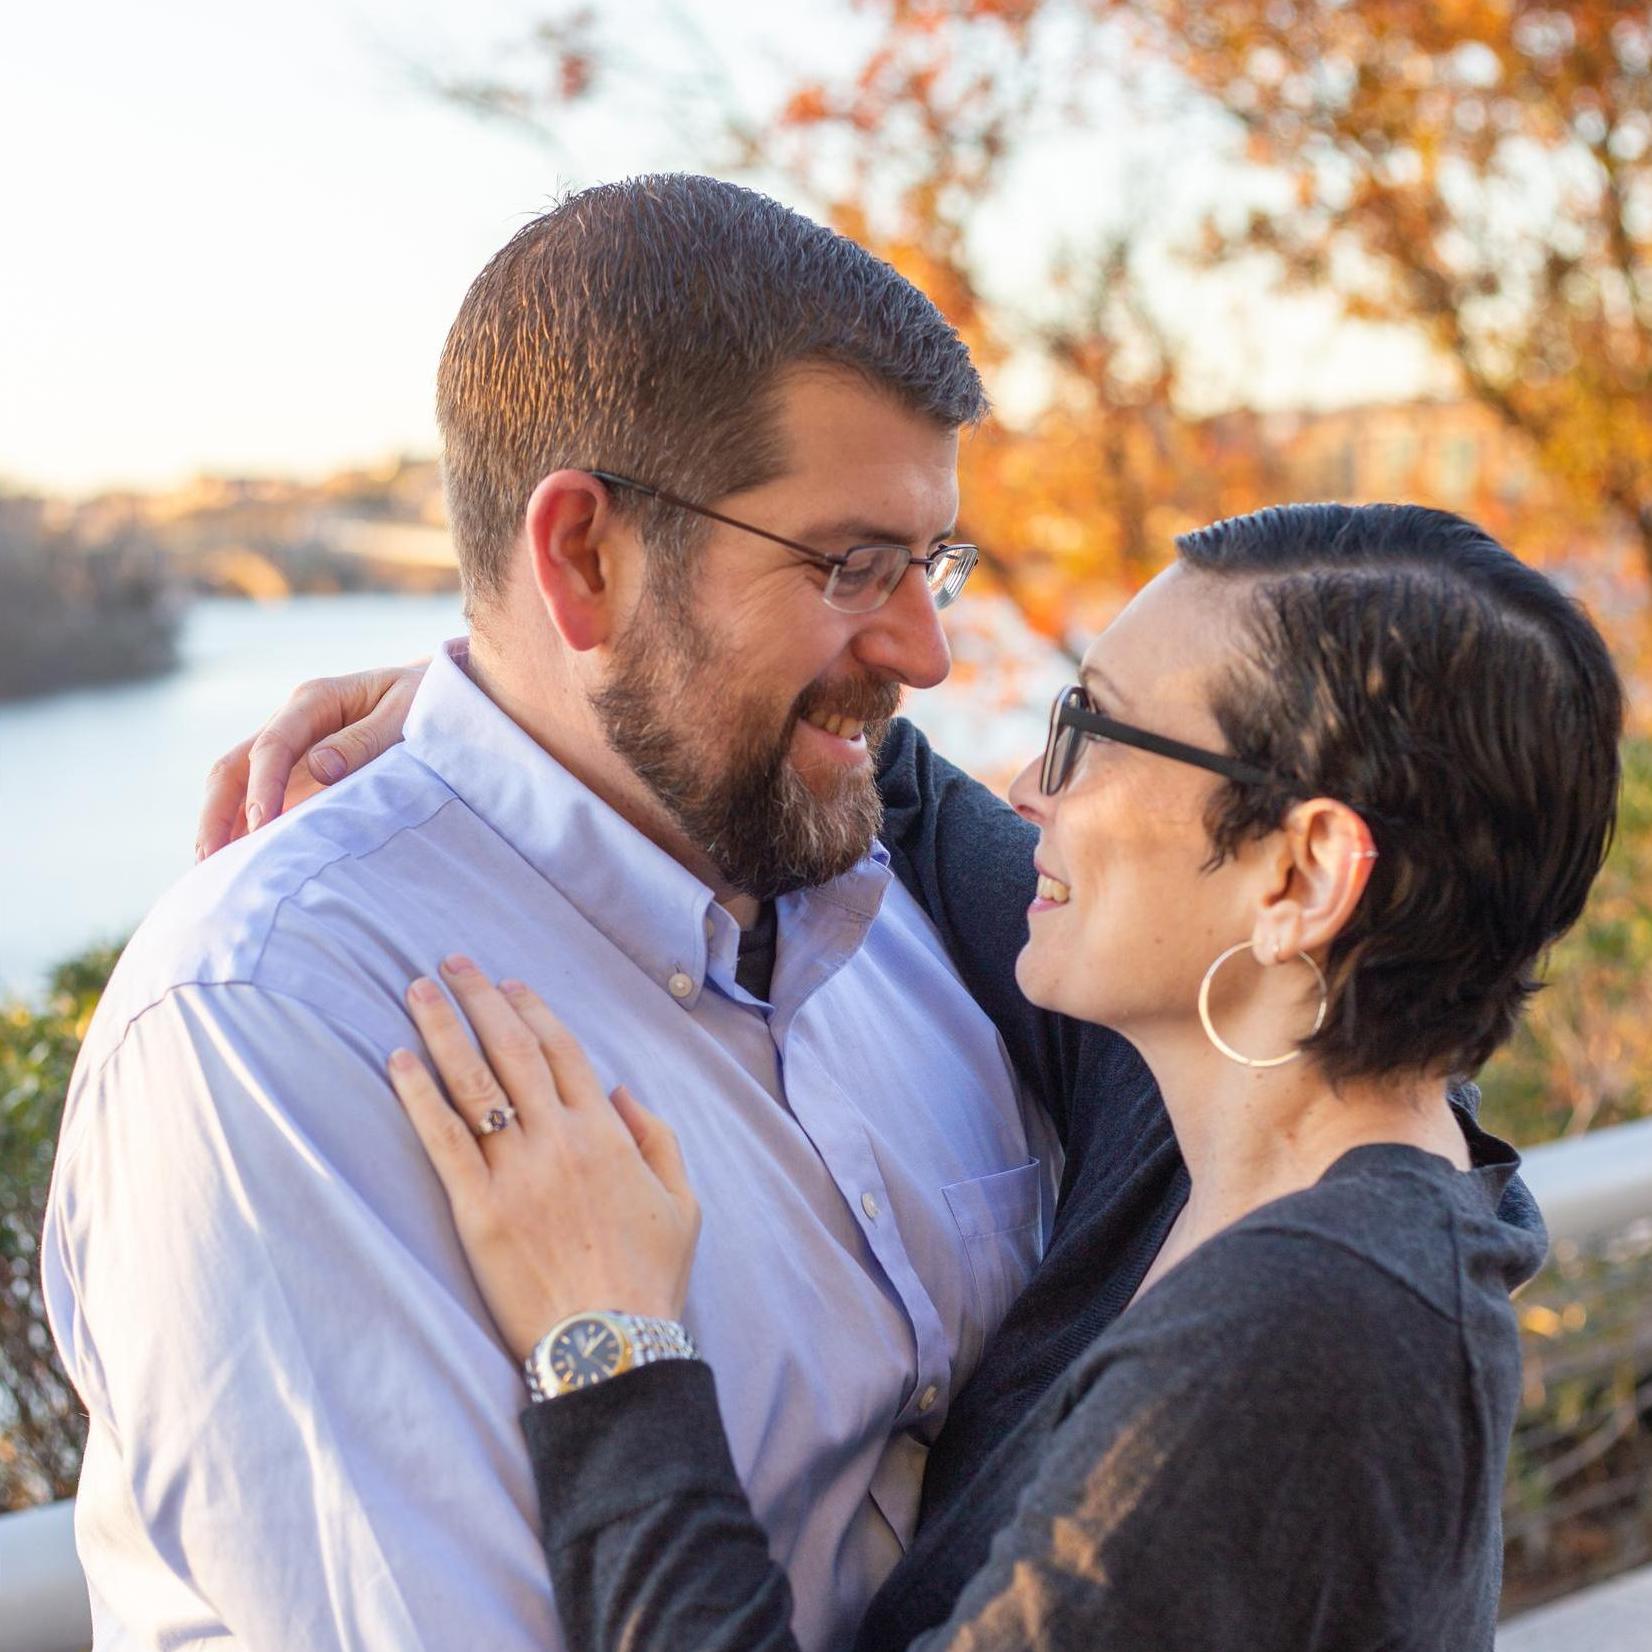 Part of our very cold engagement photo session at the Kennedy Center.